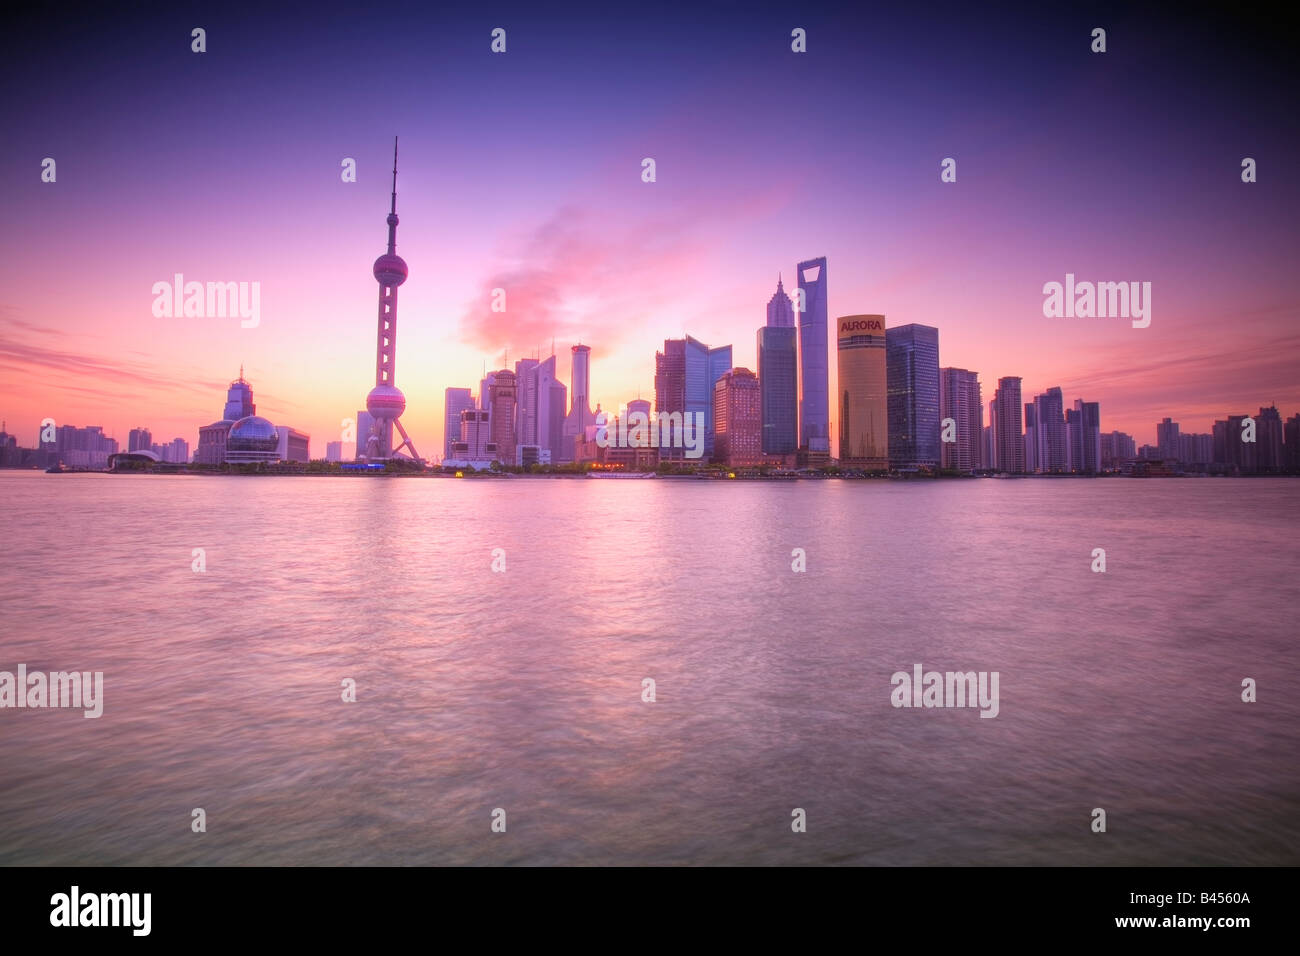 China Shanghai Financial skyline viewed over the Huangpu river from the Bund Stock Photo